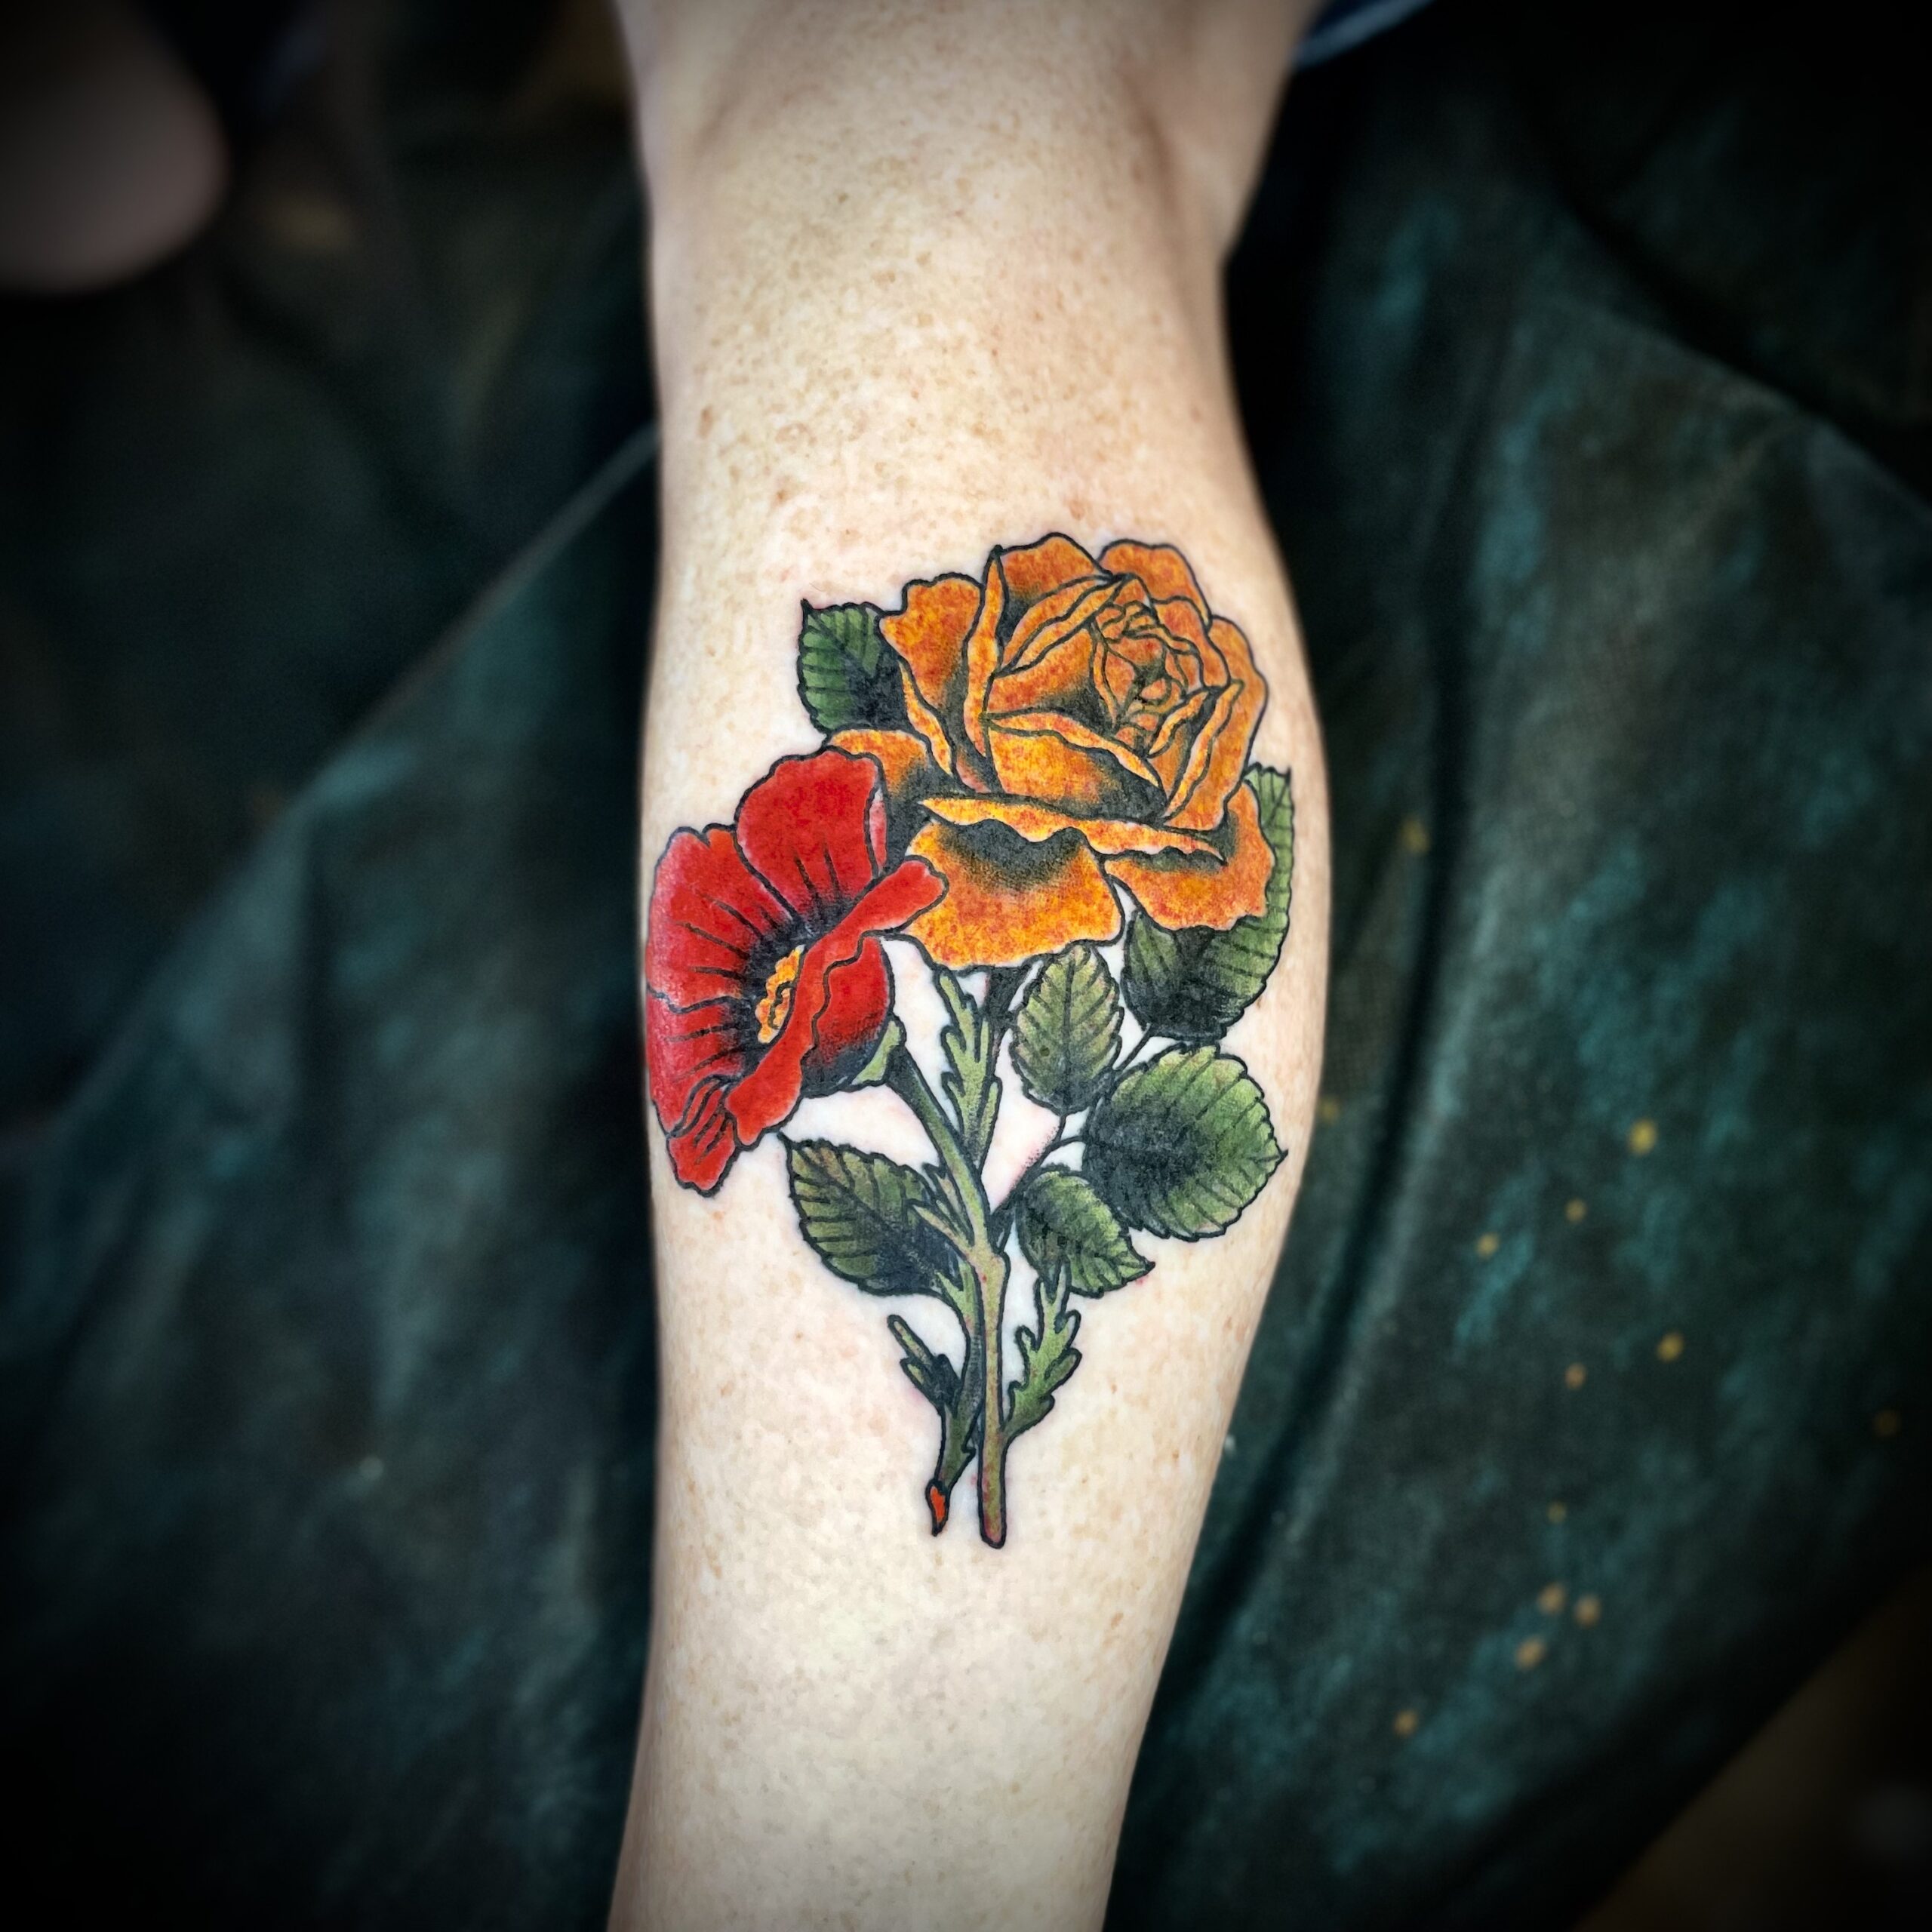 Tattoo of two flowers from top Dallas Texas tattoo artist